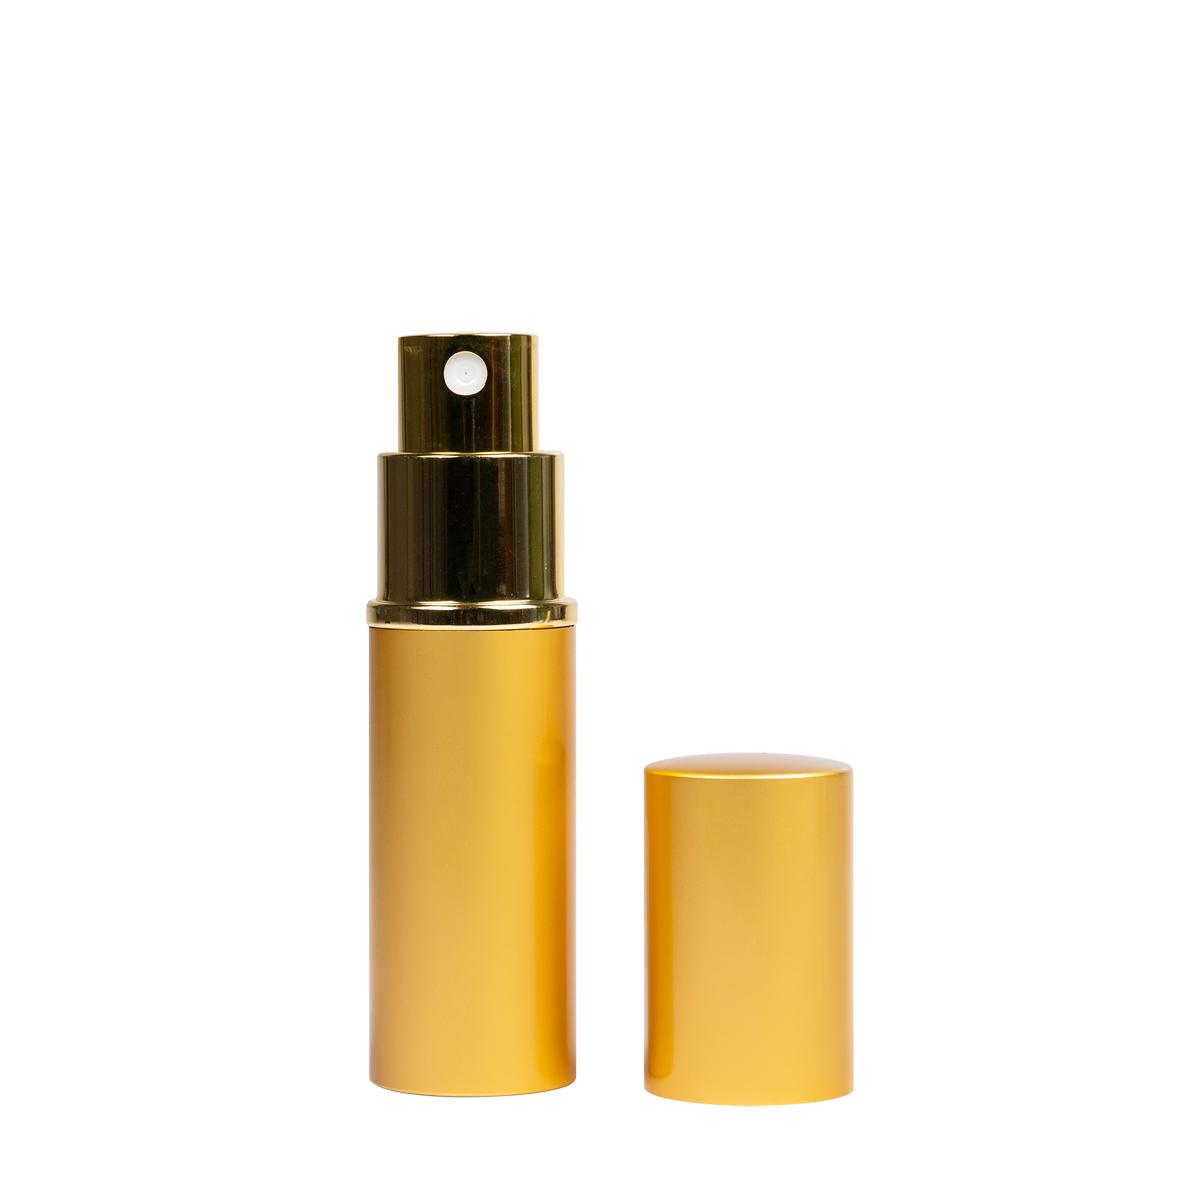 Primary image of Gold Colored Purse Atomizer